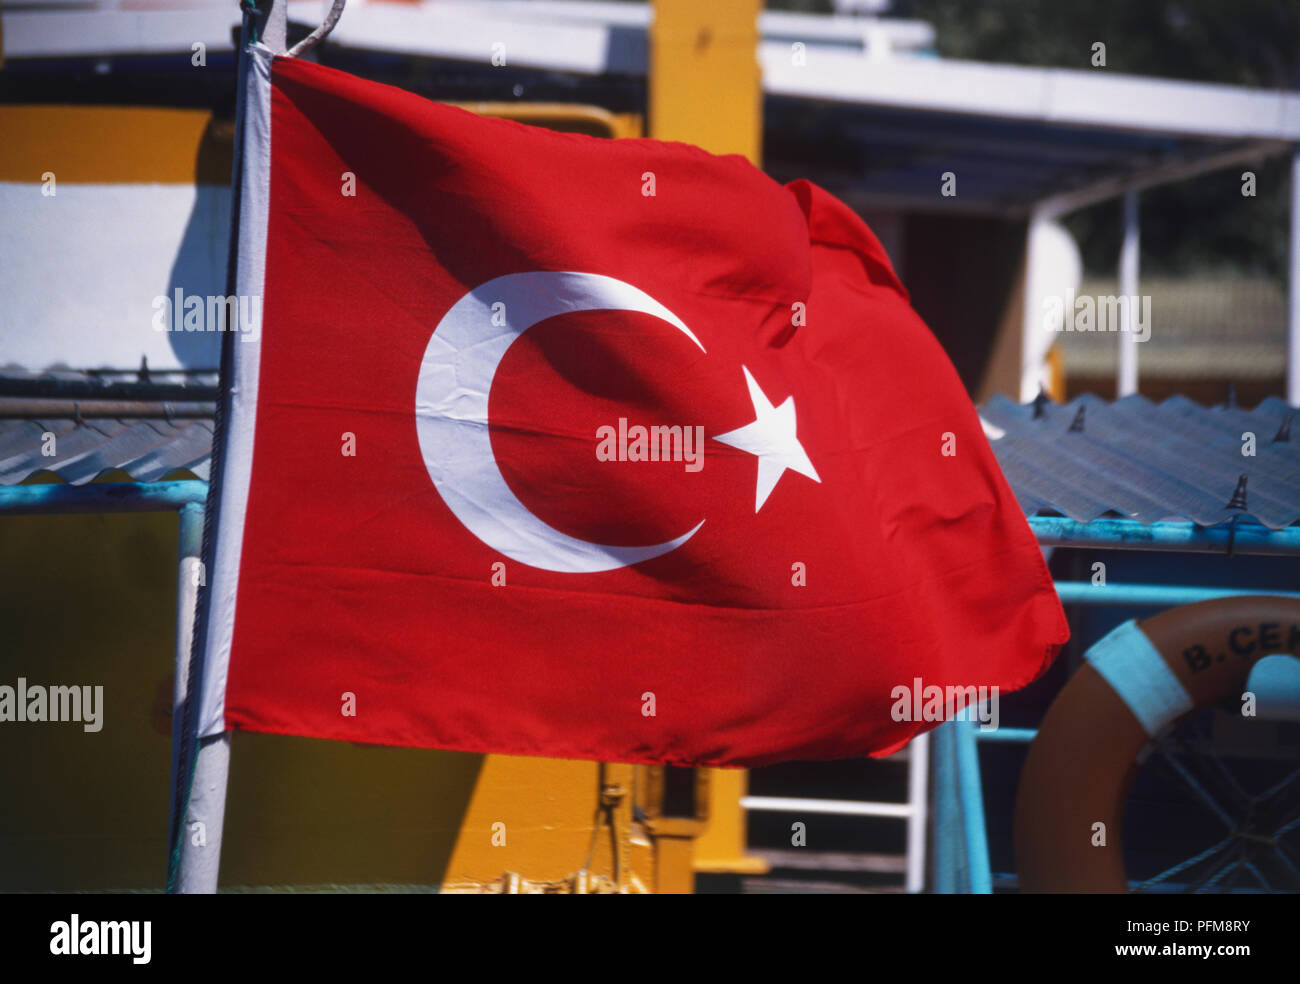 The flag of Turkey blowing in the breeze. The flag has been in use since 1844 and officially adopted 5 June 1936. The nickname of the Turksih people for this flag is ''ay yildiz'' meaning moon star. Stock Photo